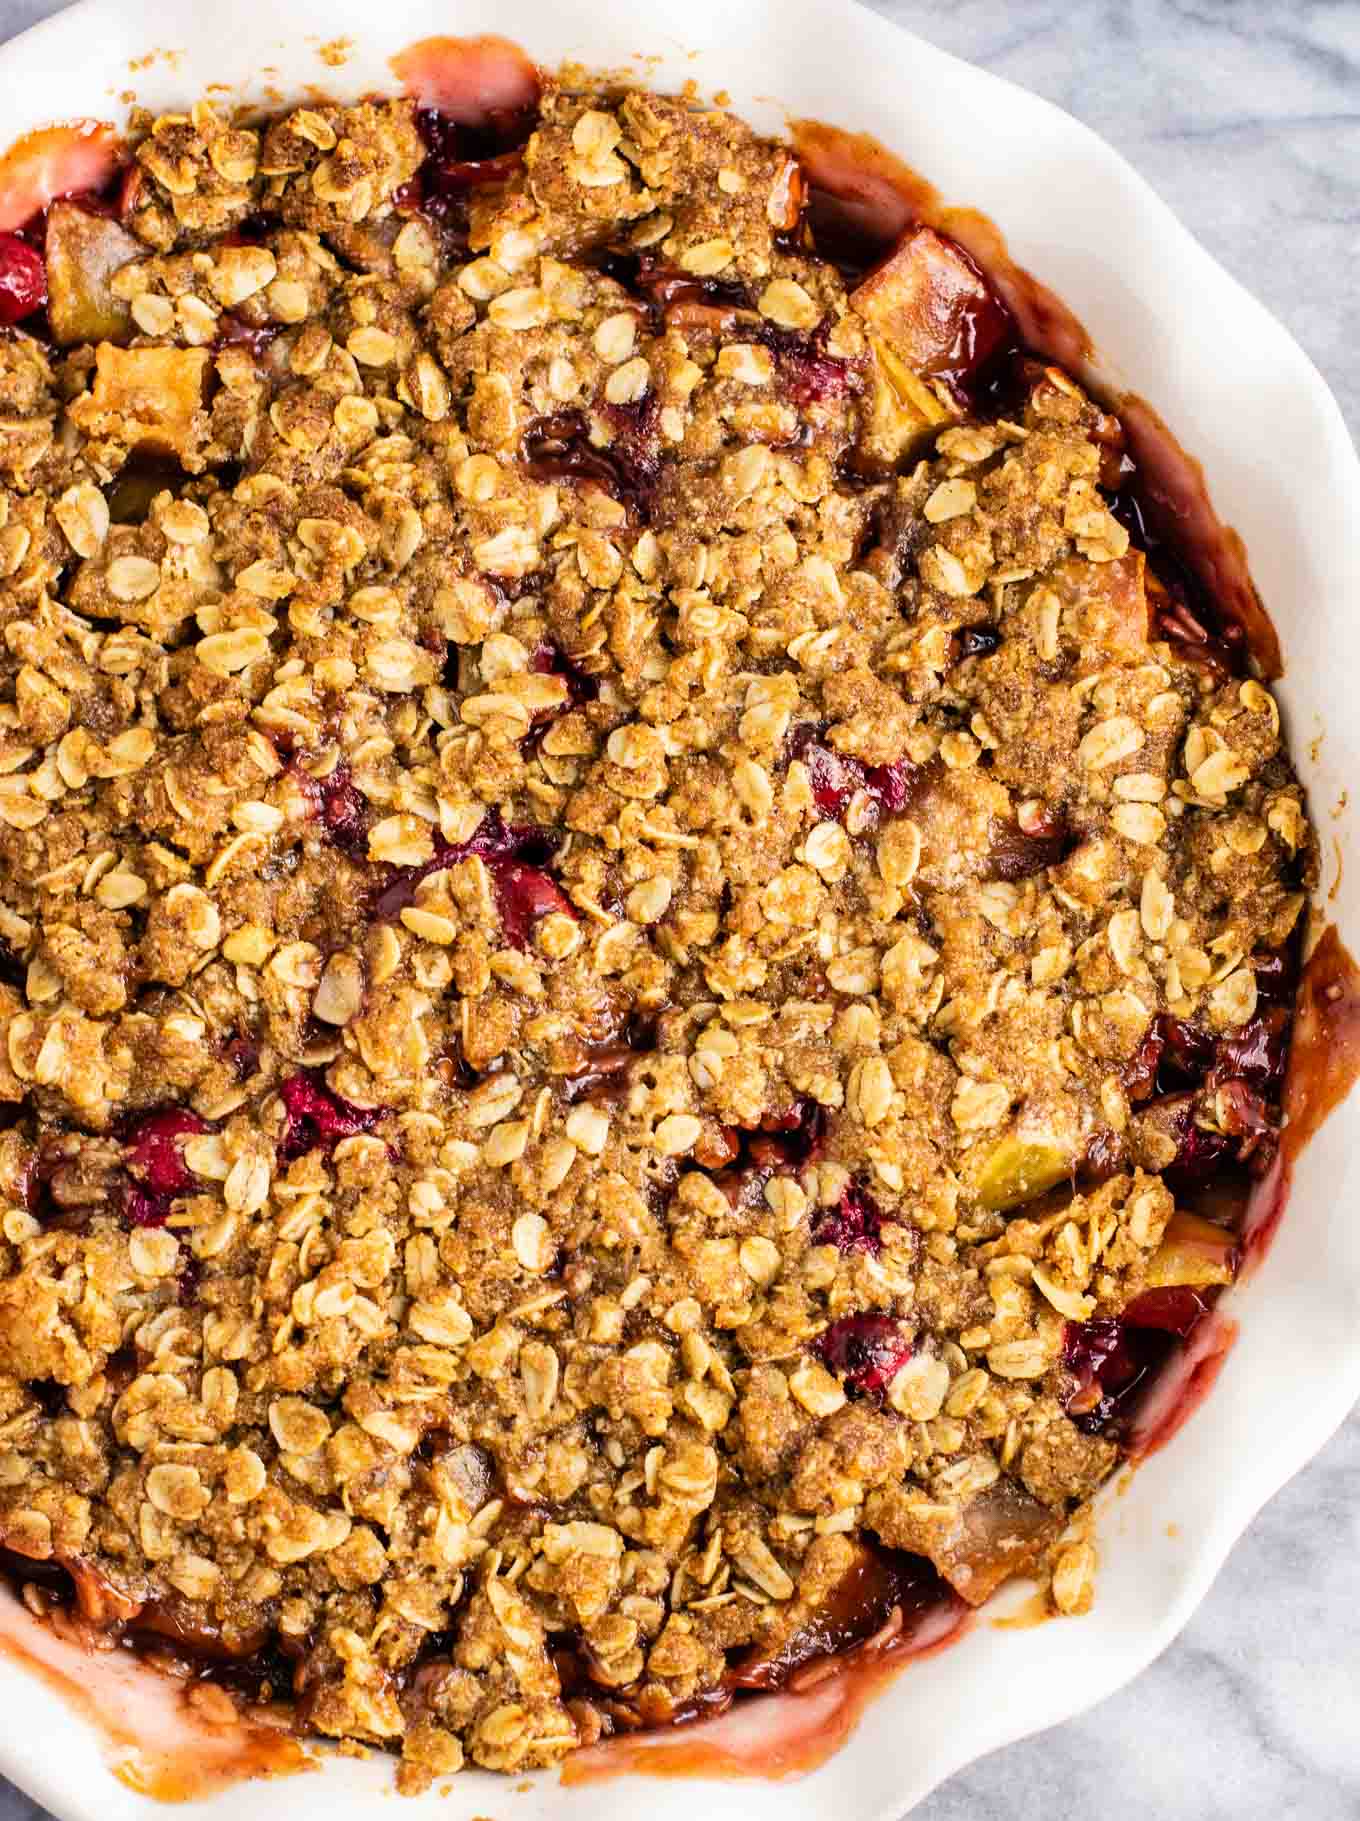 Fresh cranberry apple crisp with a gluten free oat topping. This is AMAZING! Make this for Thanksgiving, Christmas, or any day in between! #cranberry #cranberryrecipe #cranberryapplecrisp #dessert #glutenfree #glutenfreedessert